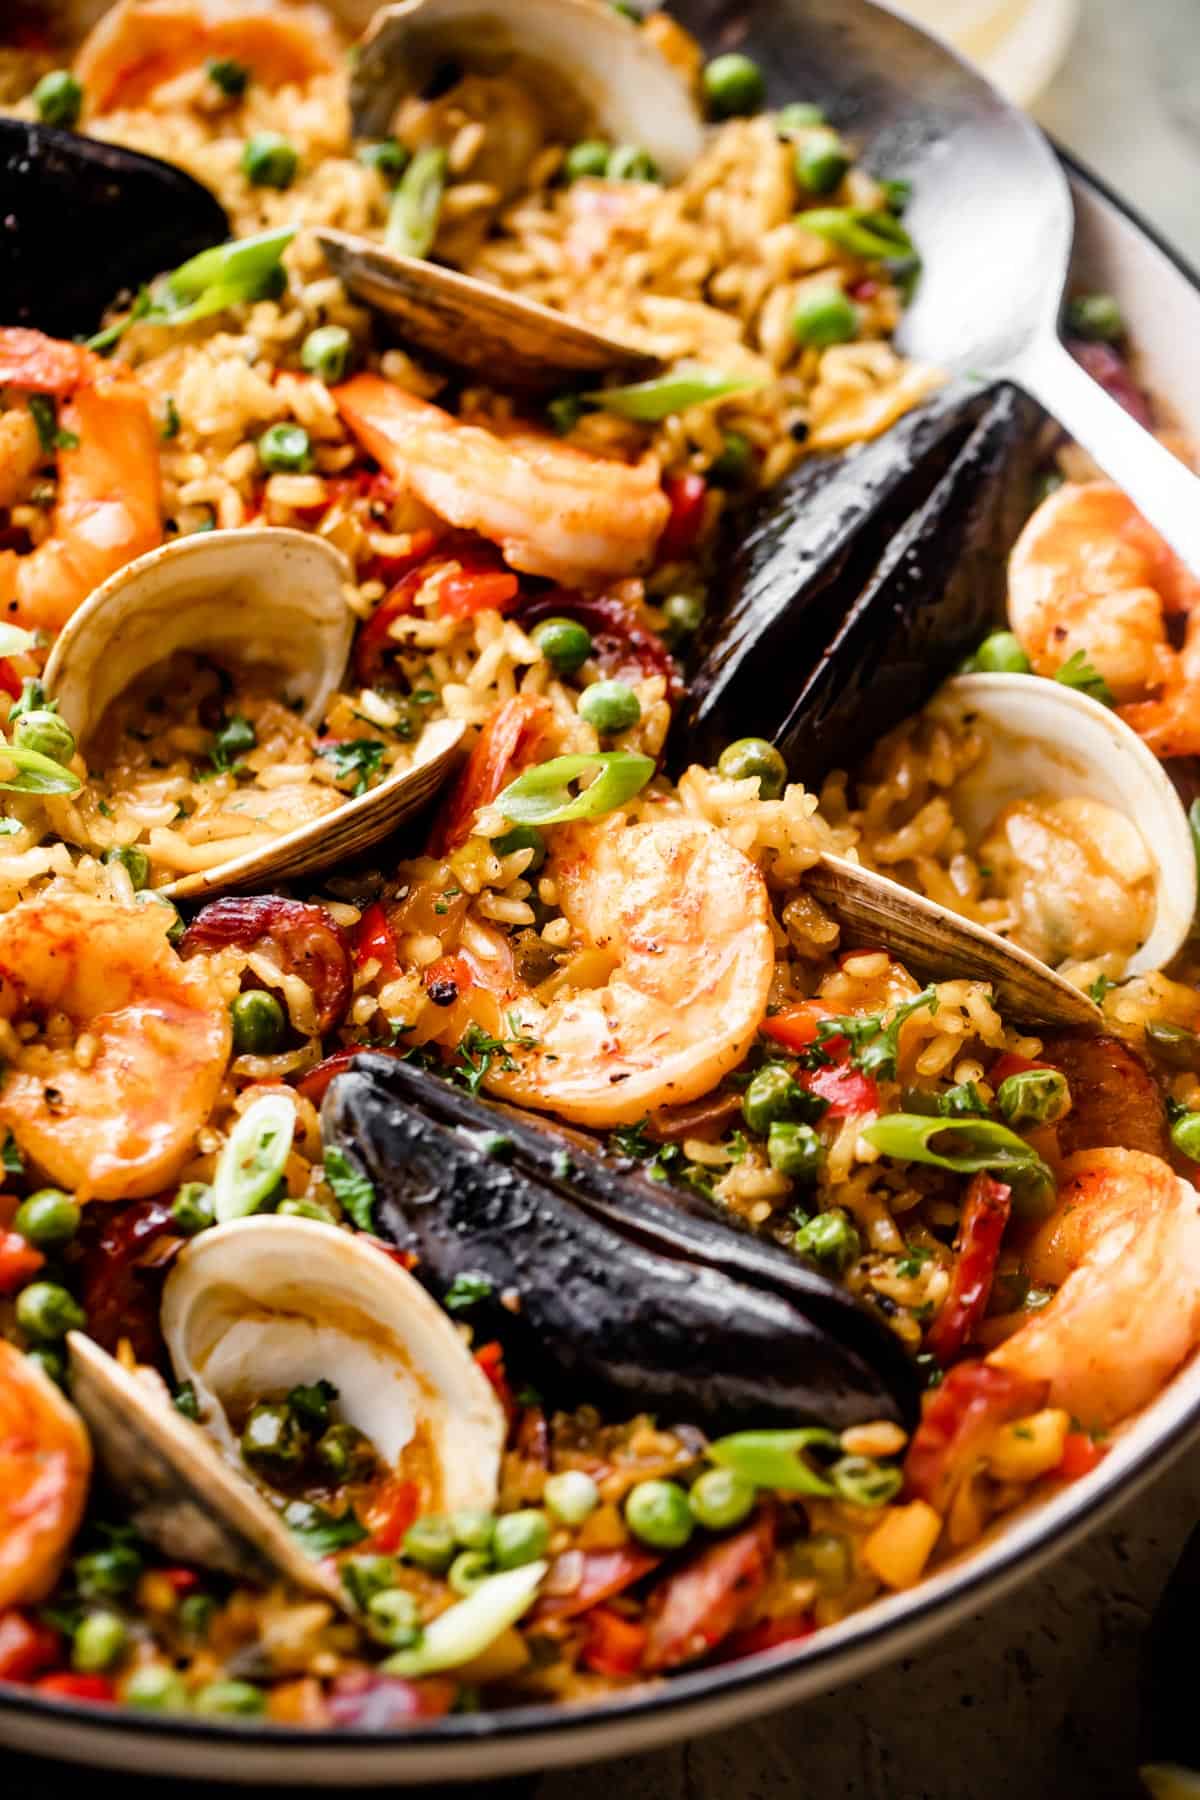 The Best Substitute For Paella Rice: 10 Options To Try